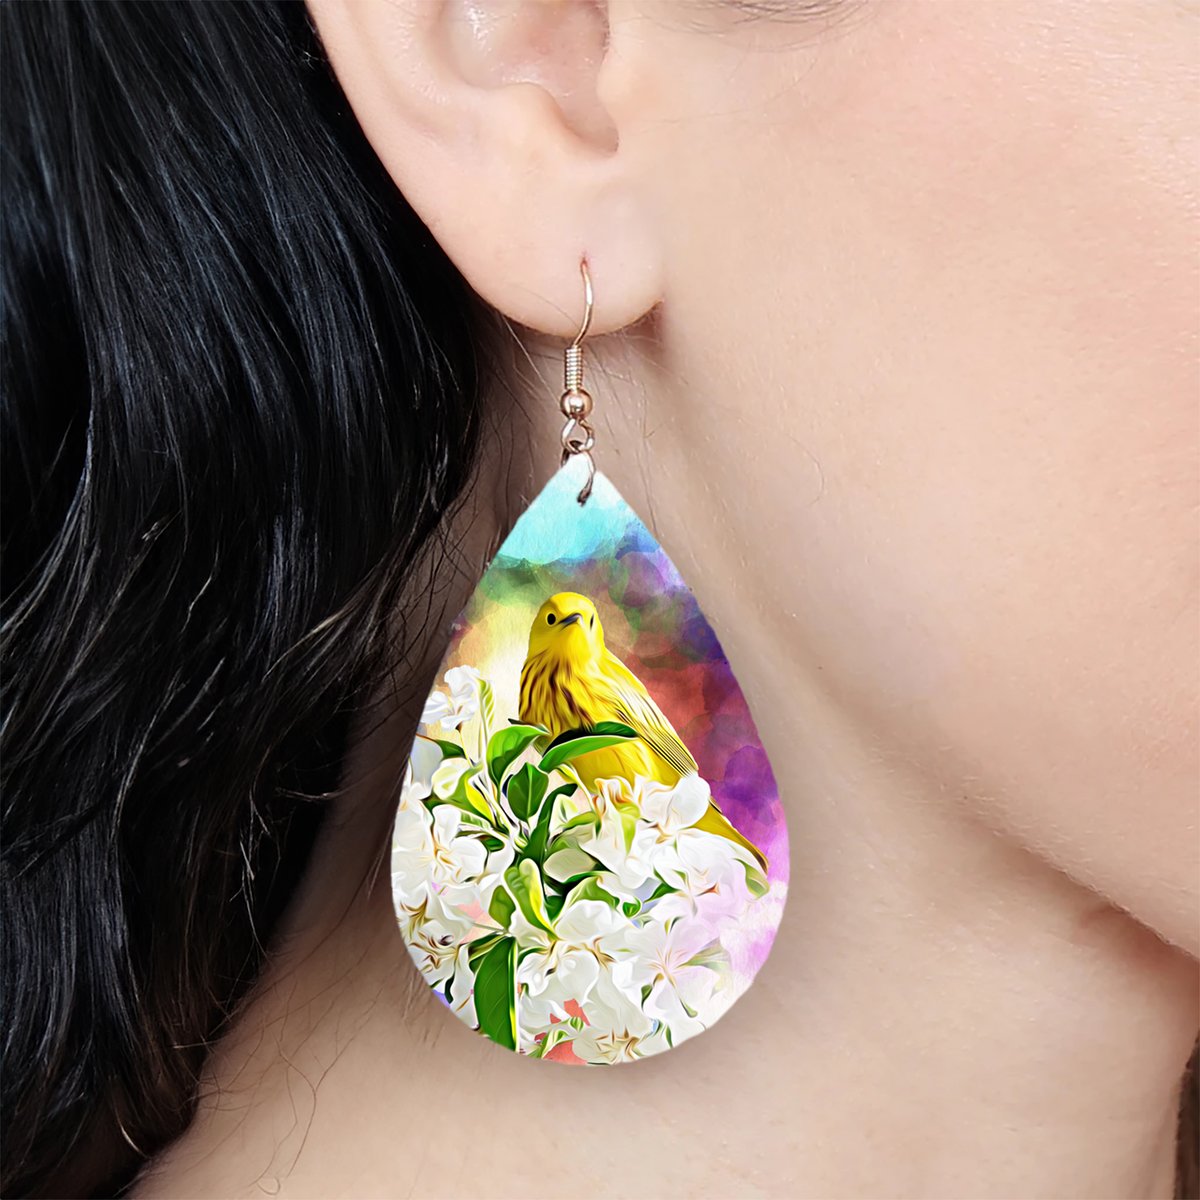 Bird & Blossom Teardrop Earring sublimation design can be a great gift for nature lovers !
hnddesignshop.etsy.com
#DIYJewelry #UniqueGift #SublimationDesigns #EarringStyle #BlossomEarrings #BirdDesign #CraftyGifts #mothersdaygift #giftforher
#HandmadeJewelry #EarringInspiration